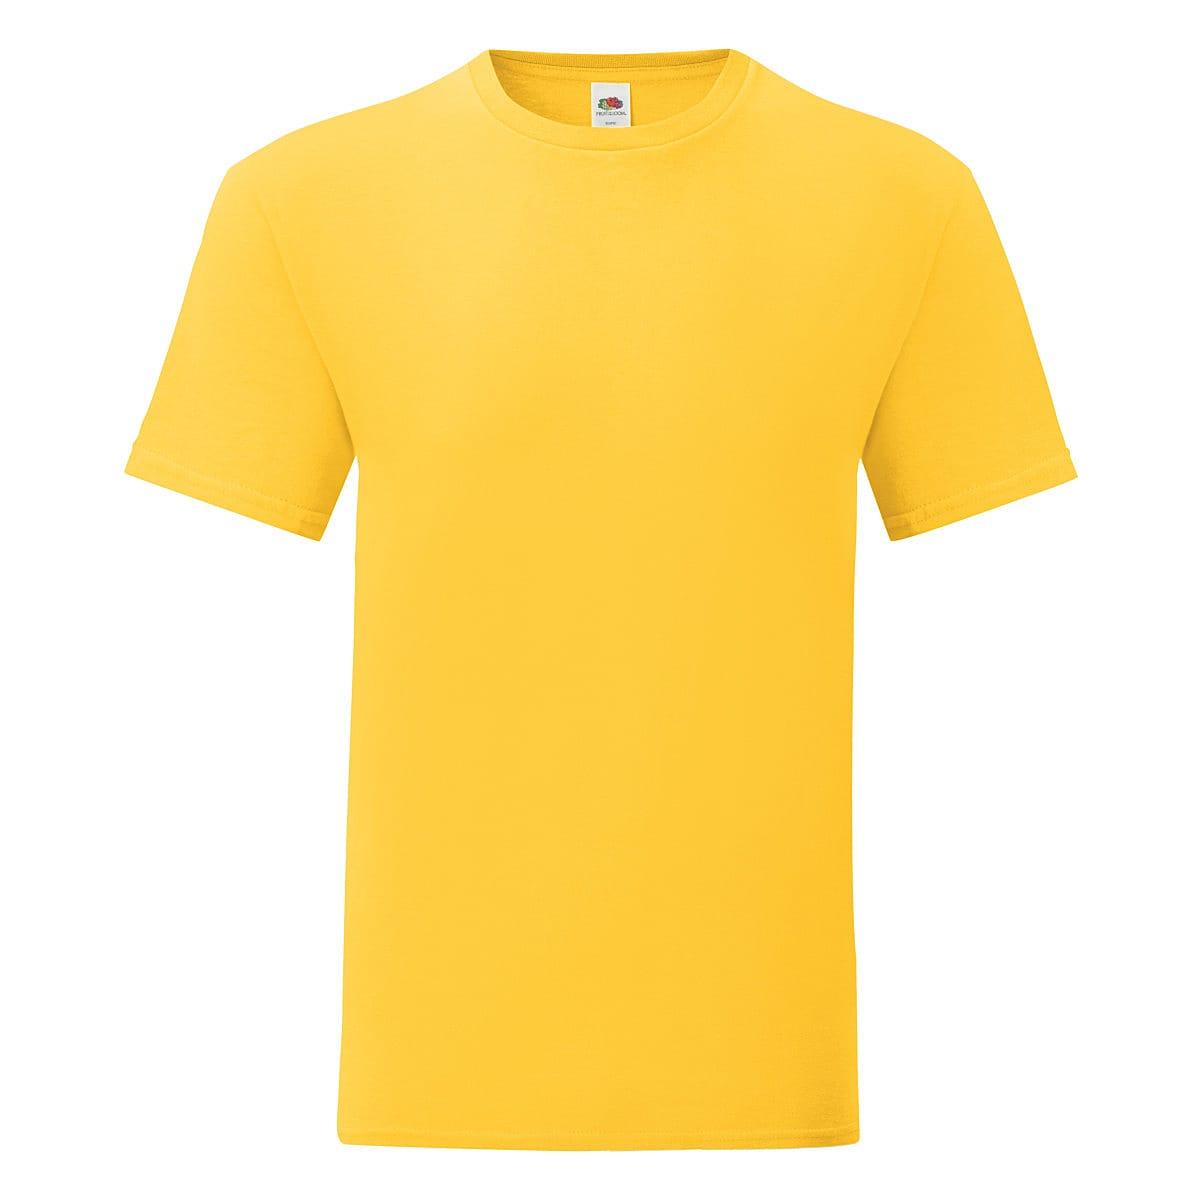 Fruit Of The Loom Mens Iconic T-Shirt in Sunflower (Product Code: 61430)